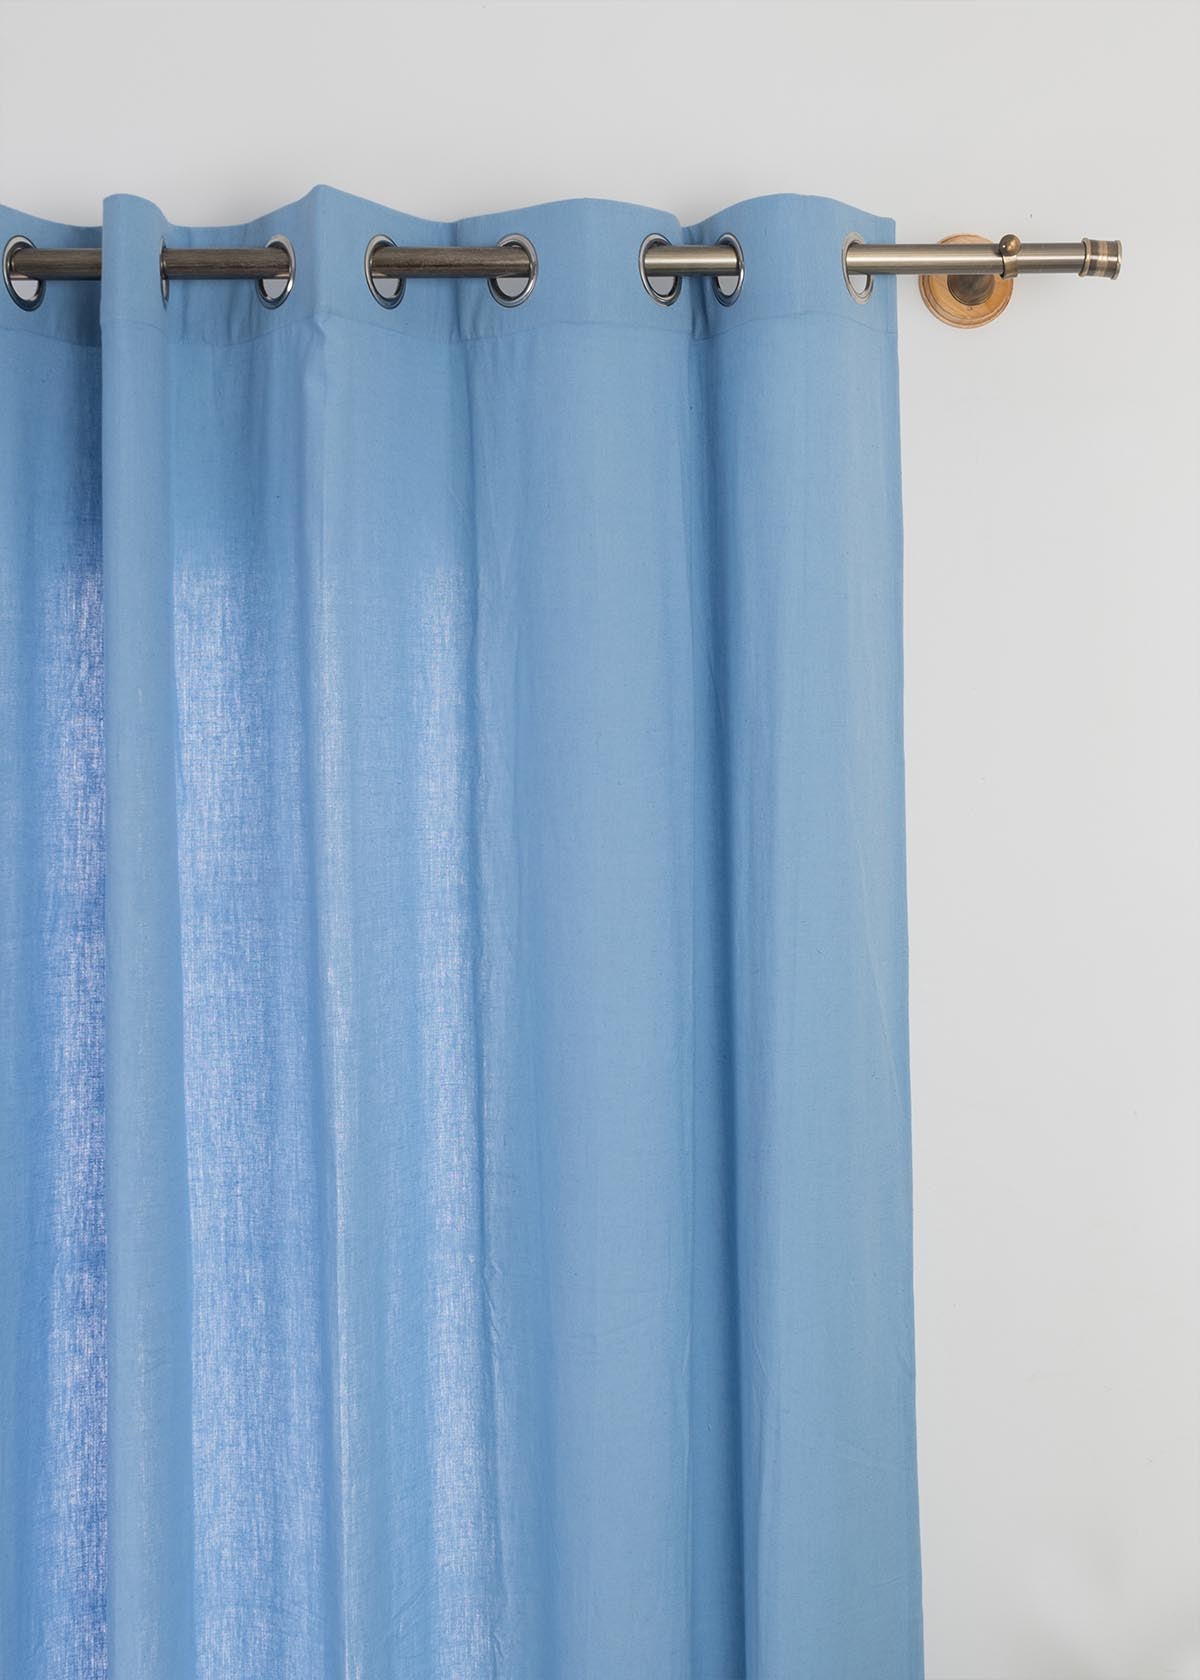 Solid Powder blue 100% cotton plain curtain for bedroom - Room darkening - Pack of 1